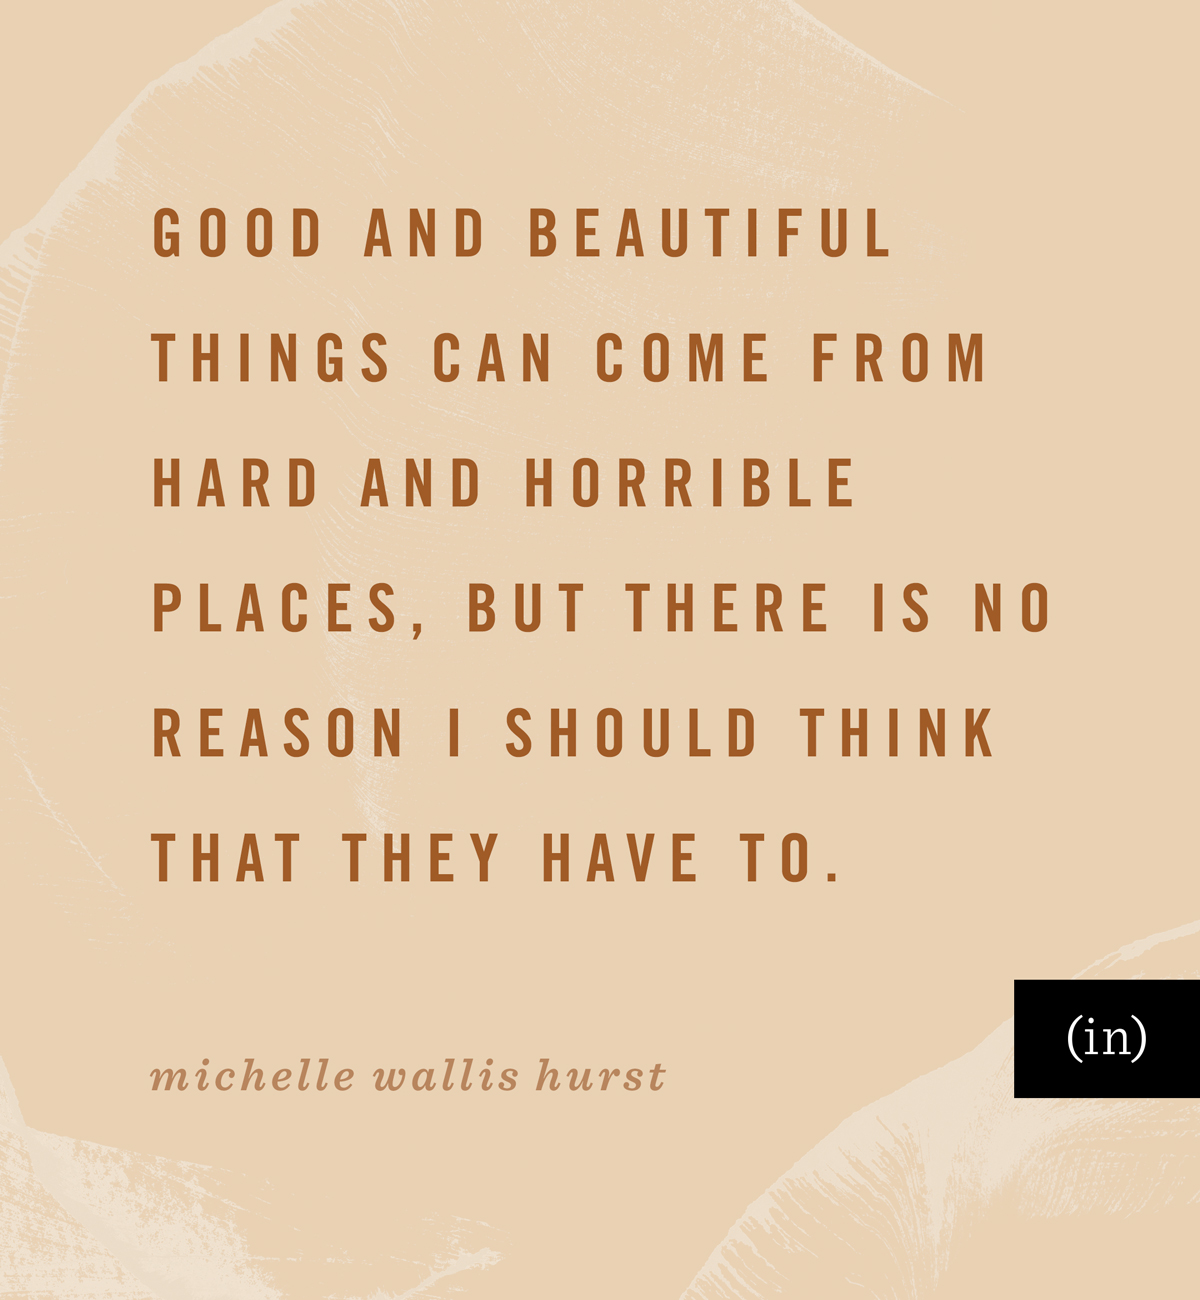 Good and beautiful things can come from hard and horrible places, but there is no reason I should think that they have to. -Michelle Wallis Hurst